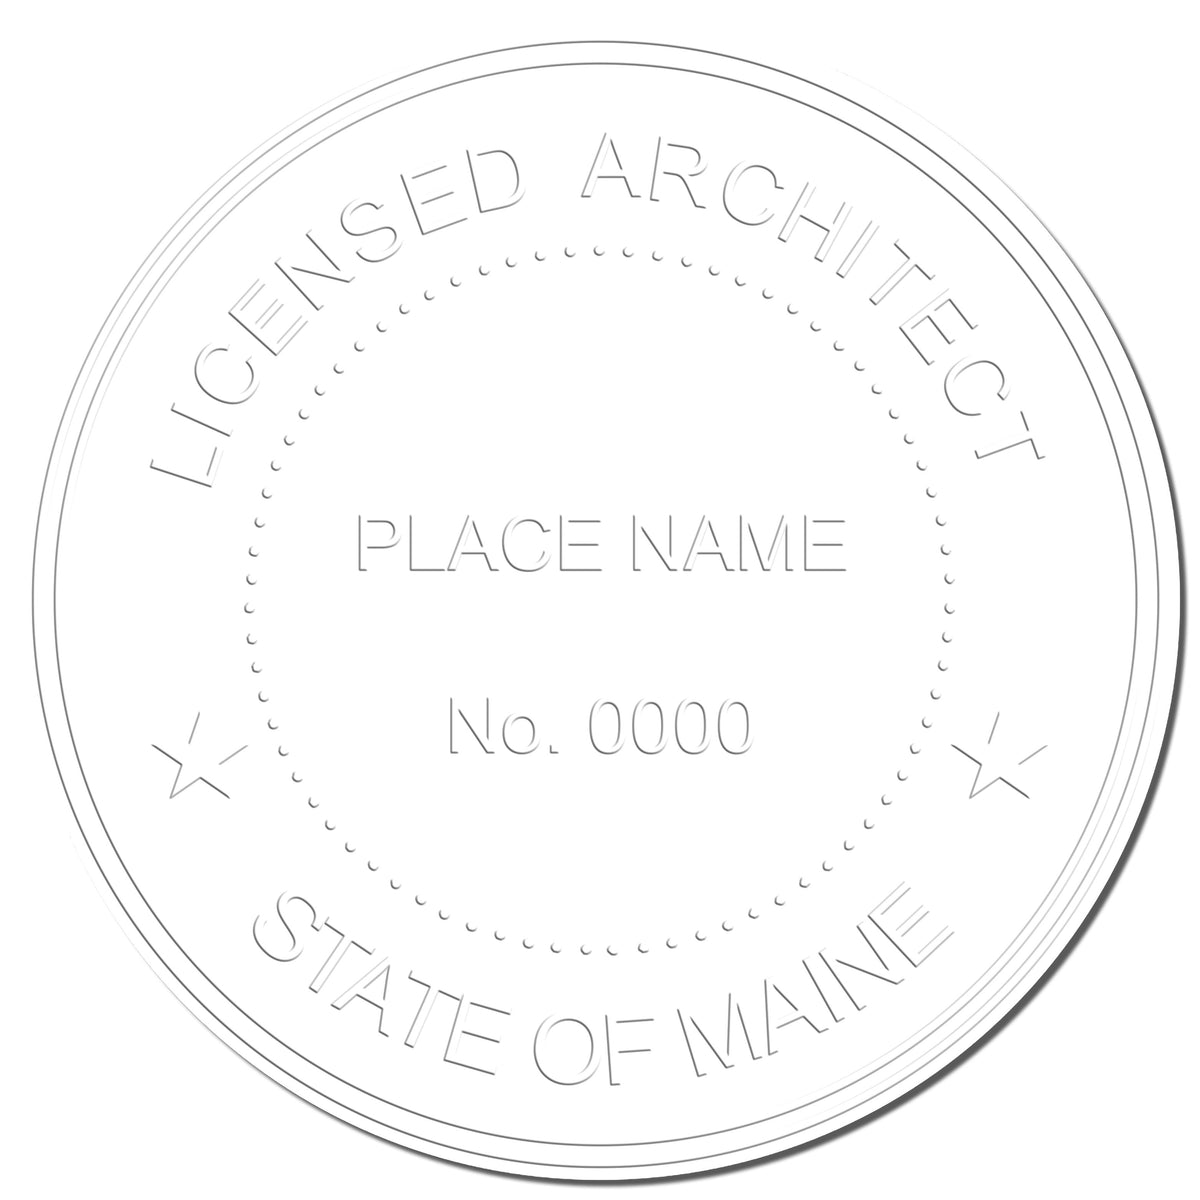 This paper is stamped with a sample imprint of the Hybrid Maine Architect Seal, signifying its quality and reliability.